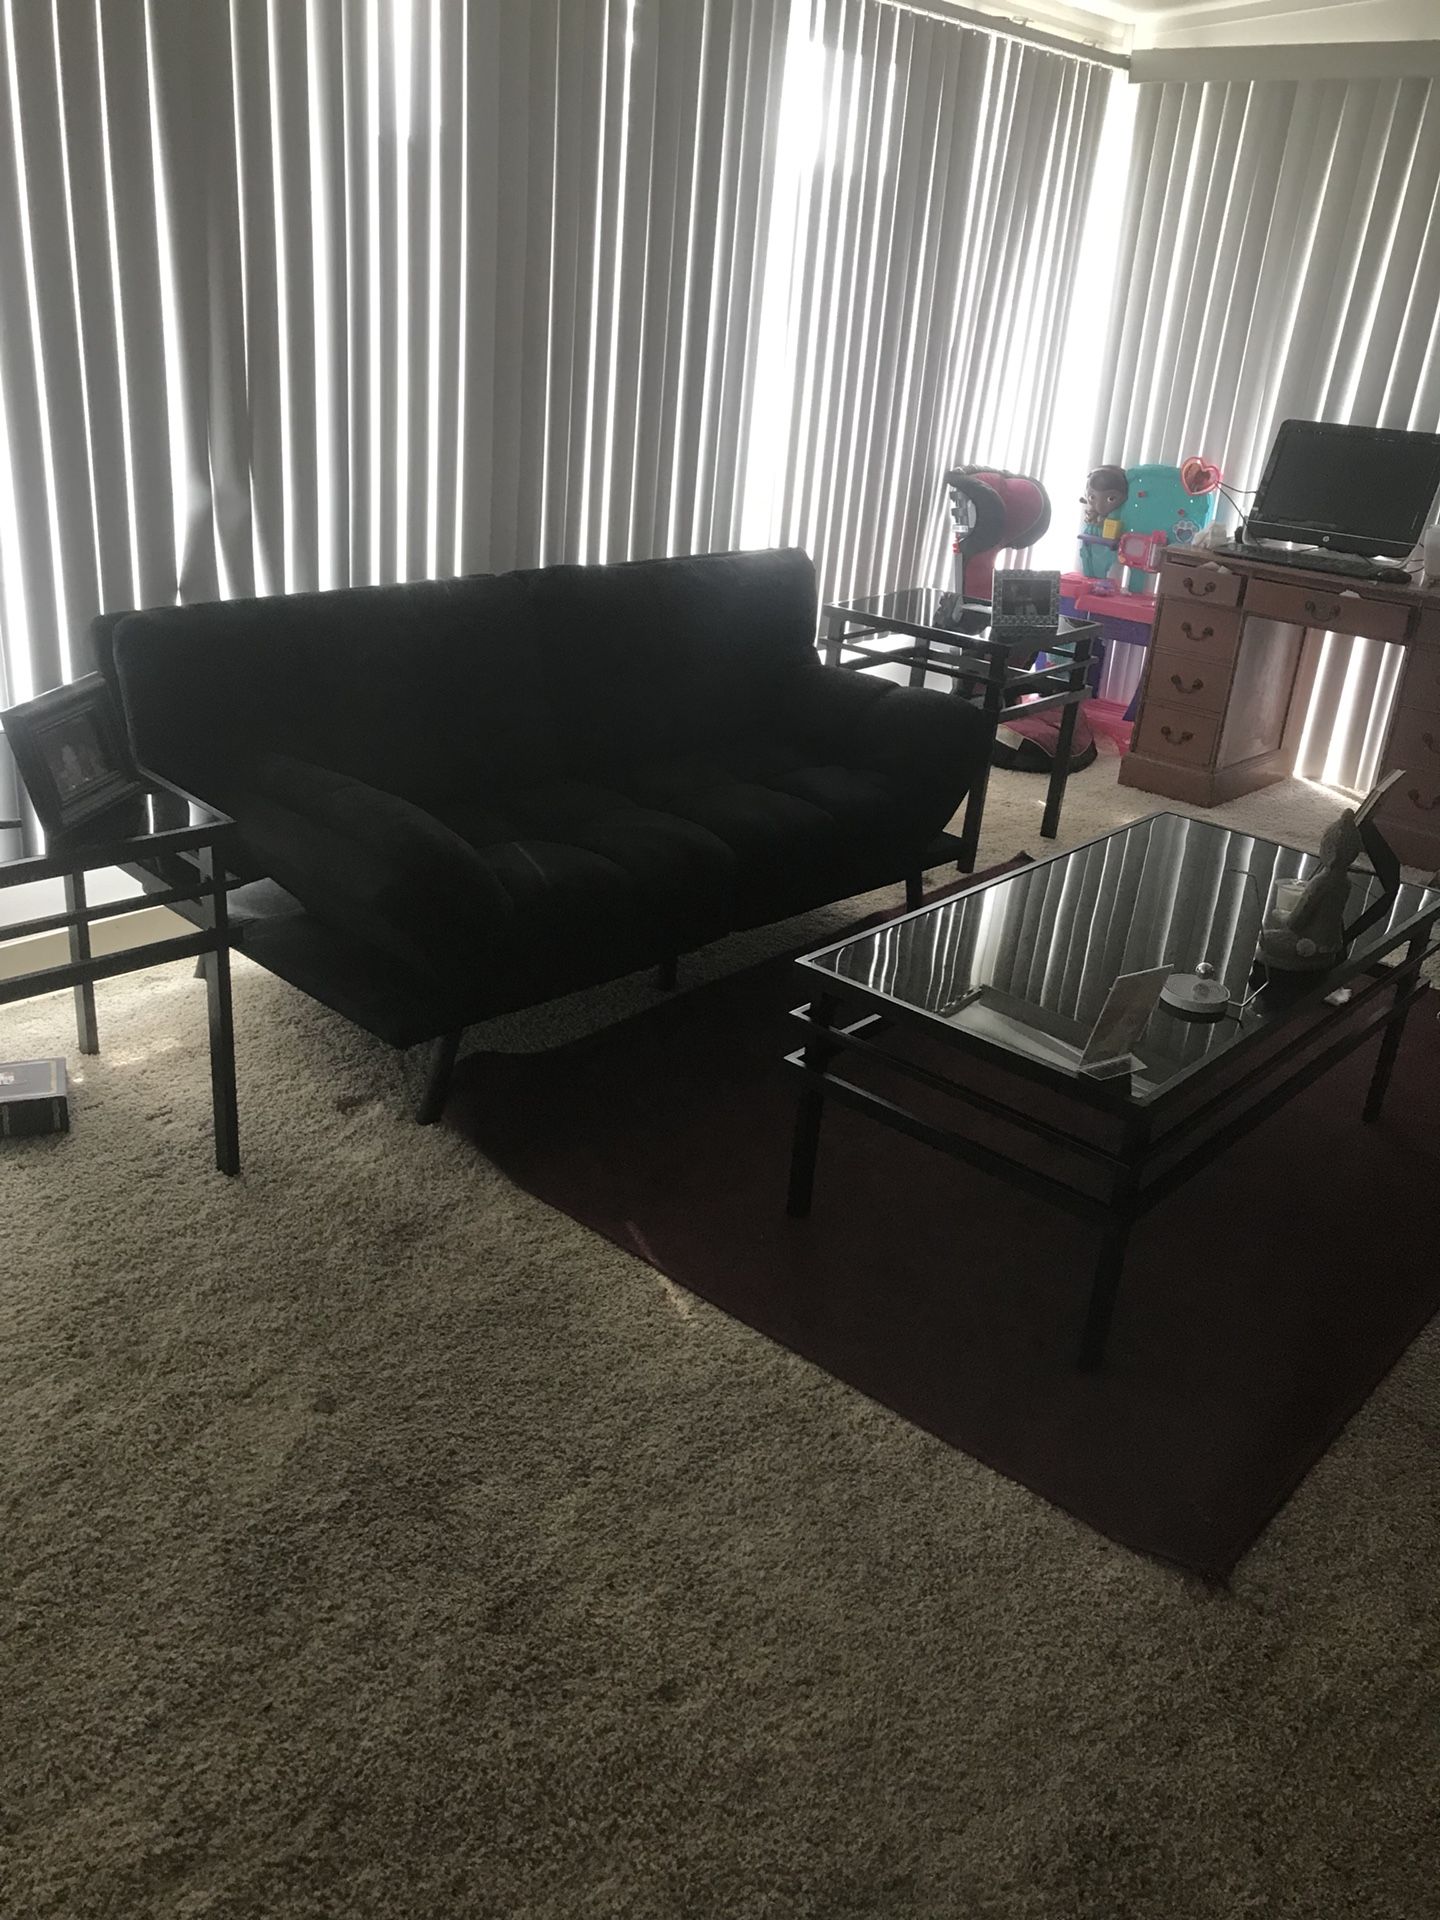 Blk Swede futon coffee and end tables for sale ...cheap